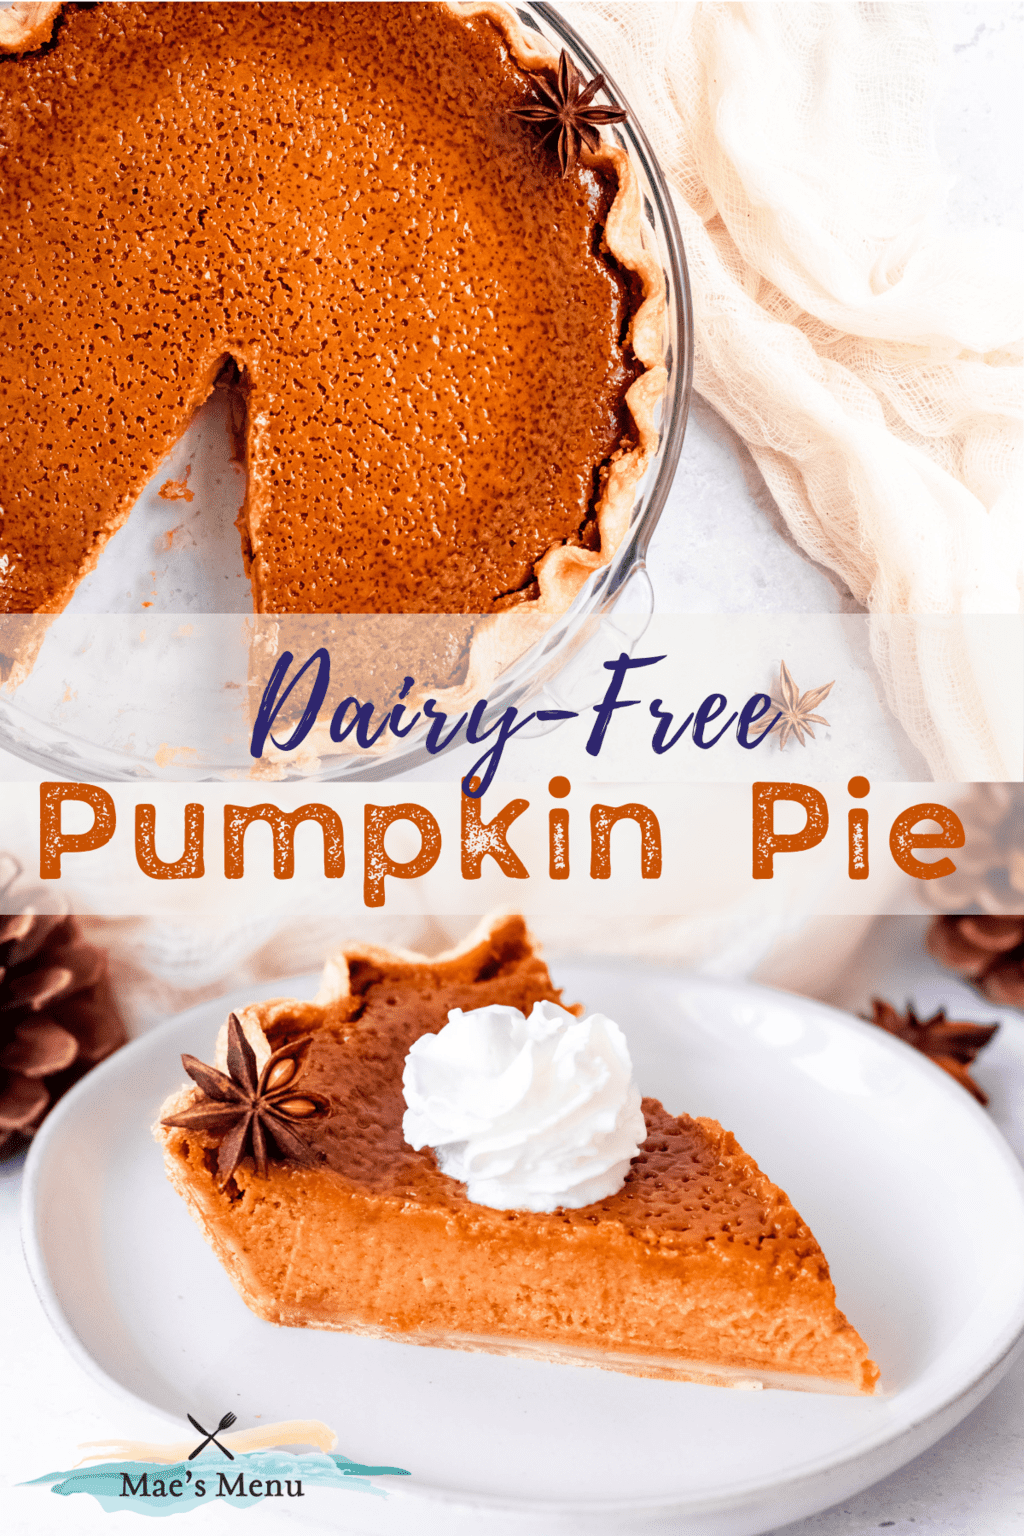 A pinterest pin for dairy-free pumpkin pie with an overhead shot of the pie in the pan with a shot of a piece of the pie on the plate below.